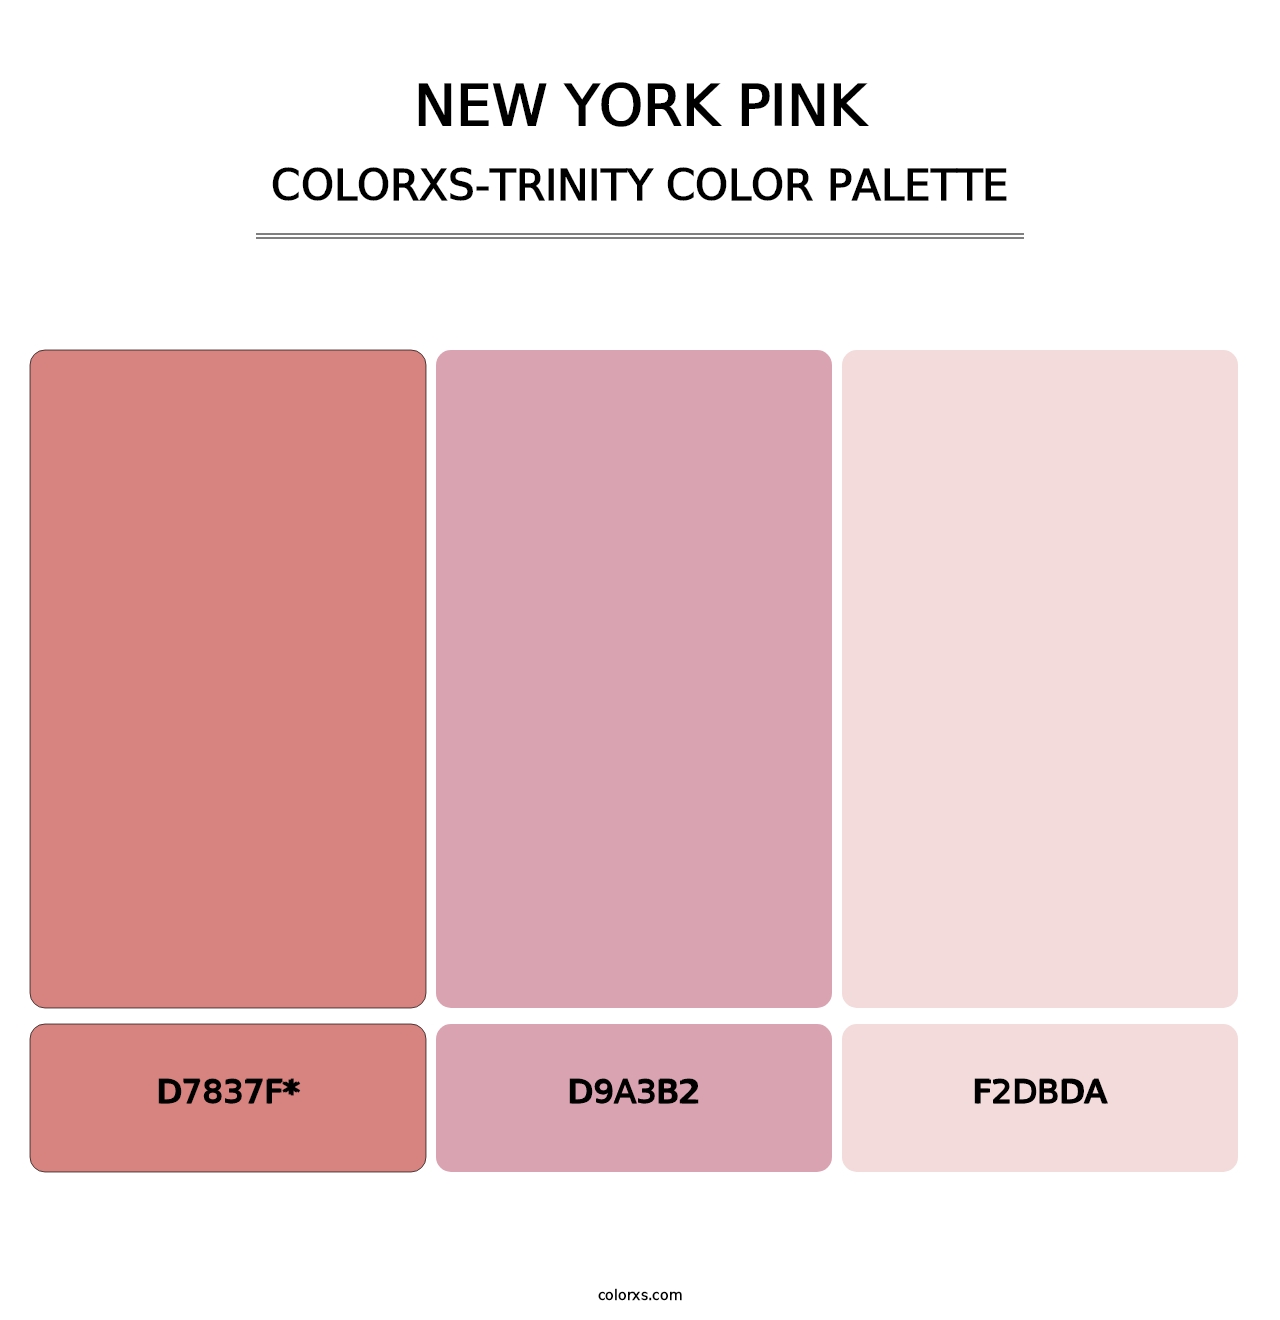 New York Pink - Colorxs Trinity Palette